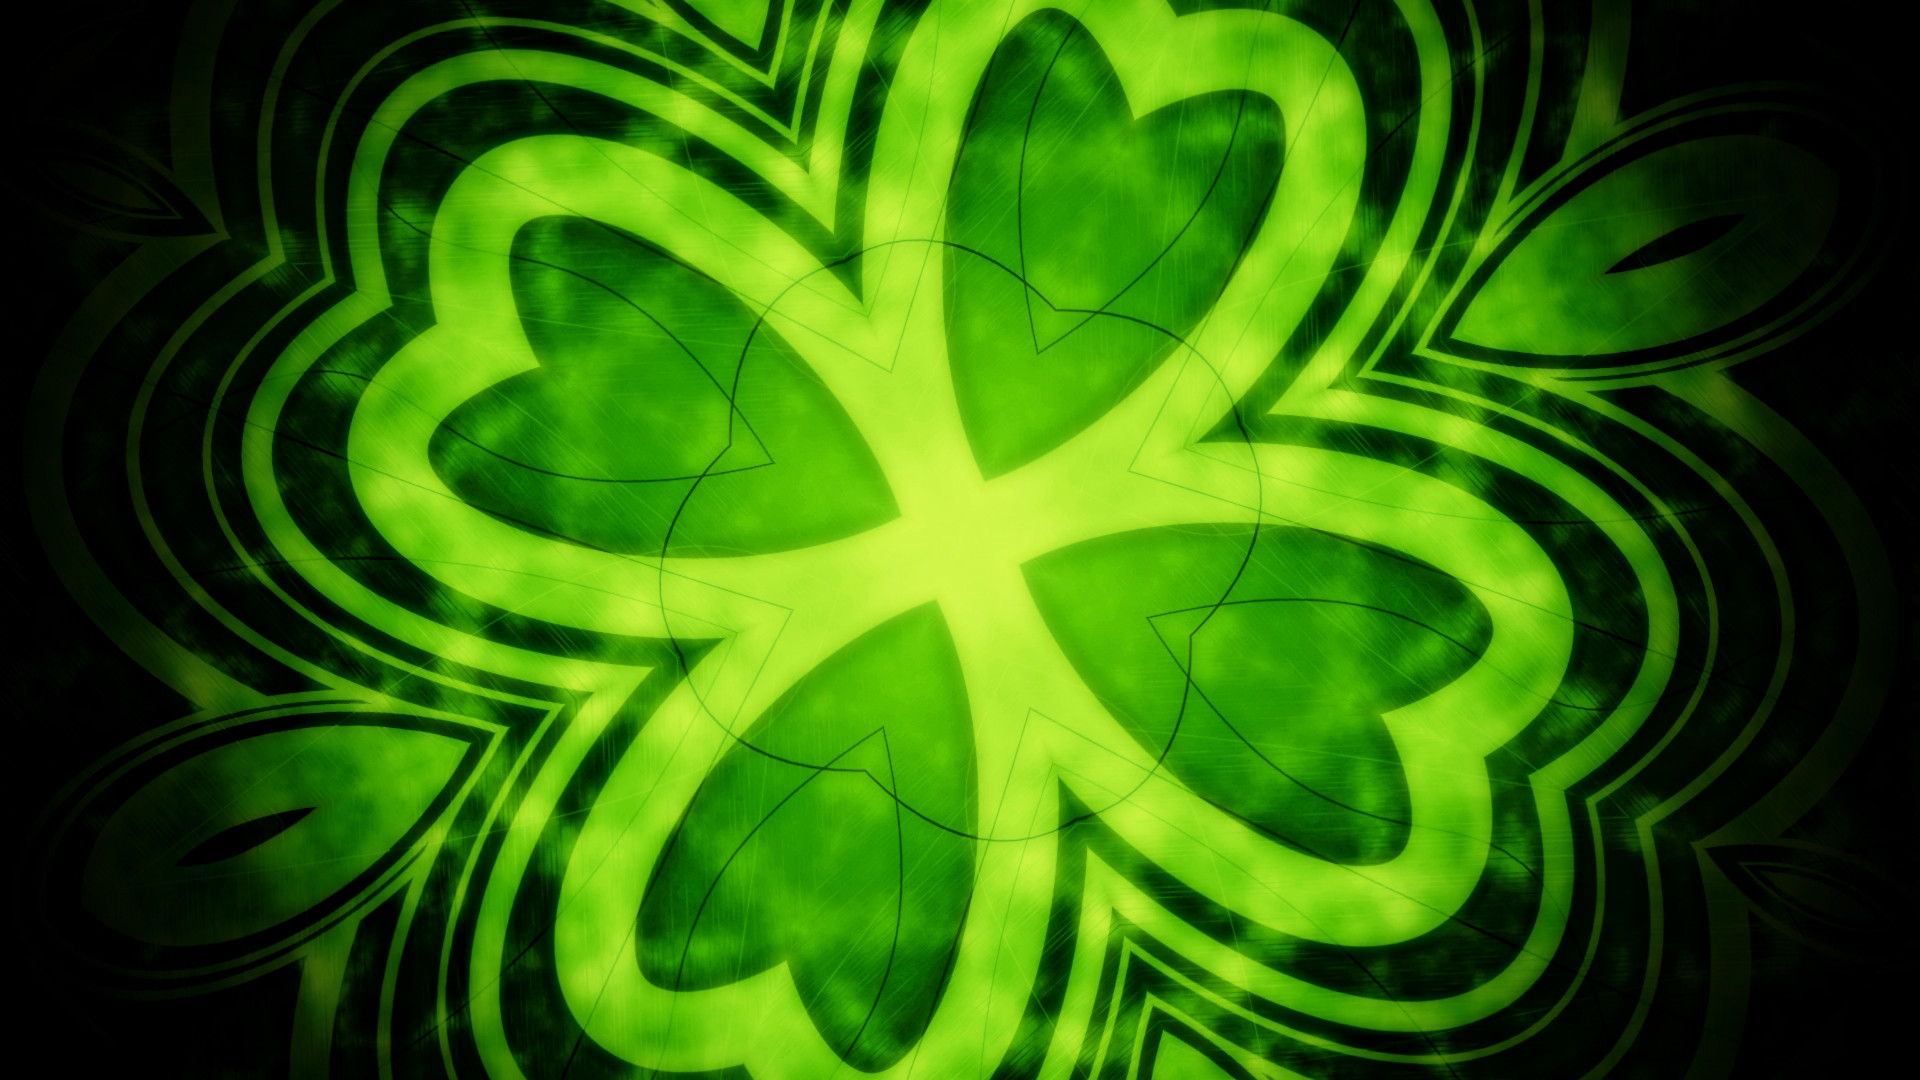 1920x1080 15 lucky Android wallpapers for St. Patricks Day | AndroidGuys Â· Celtic  ShamrockLeaf ImagesDesktop ...